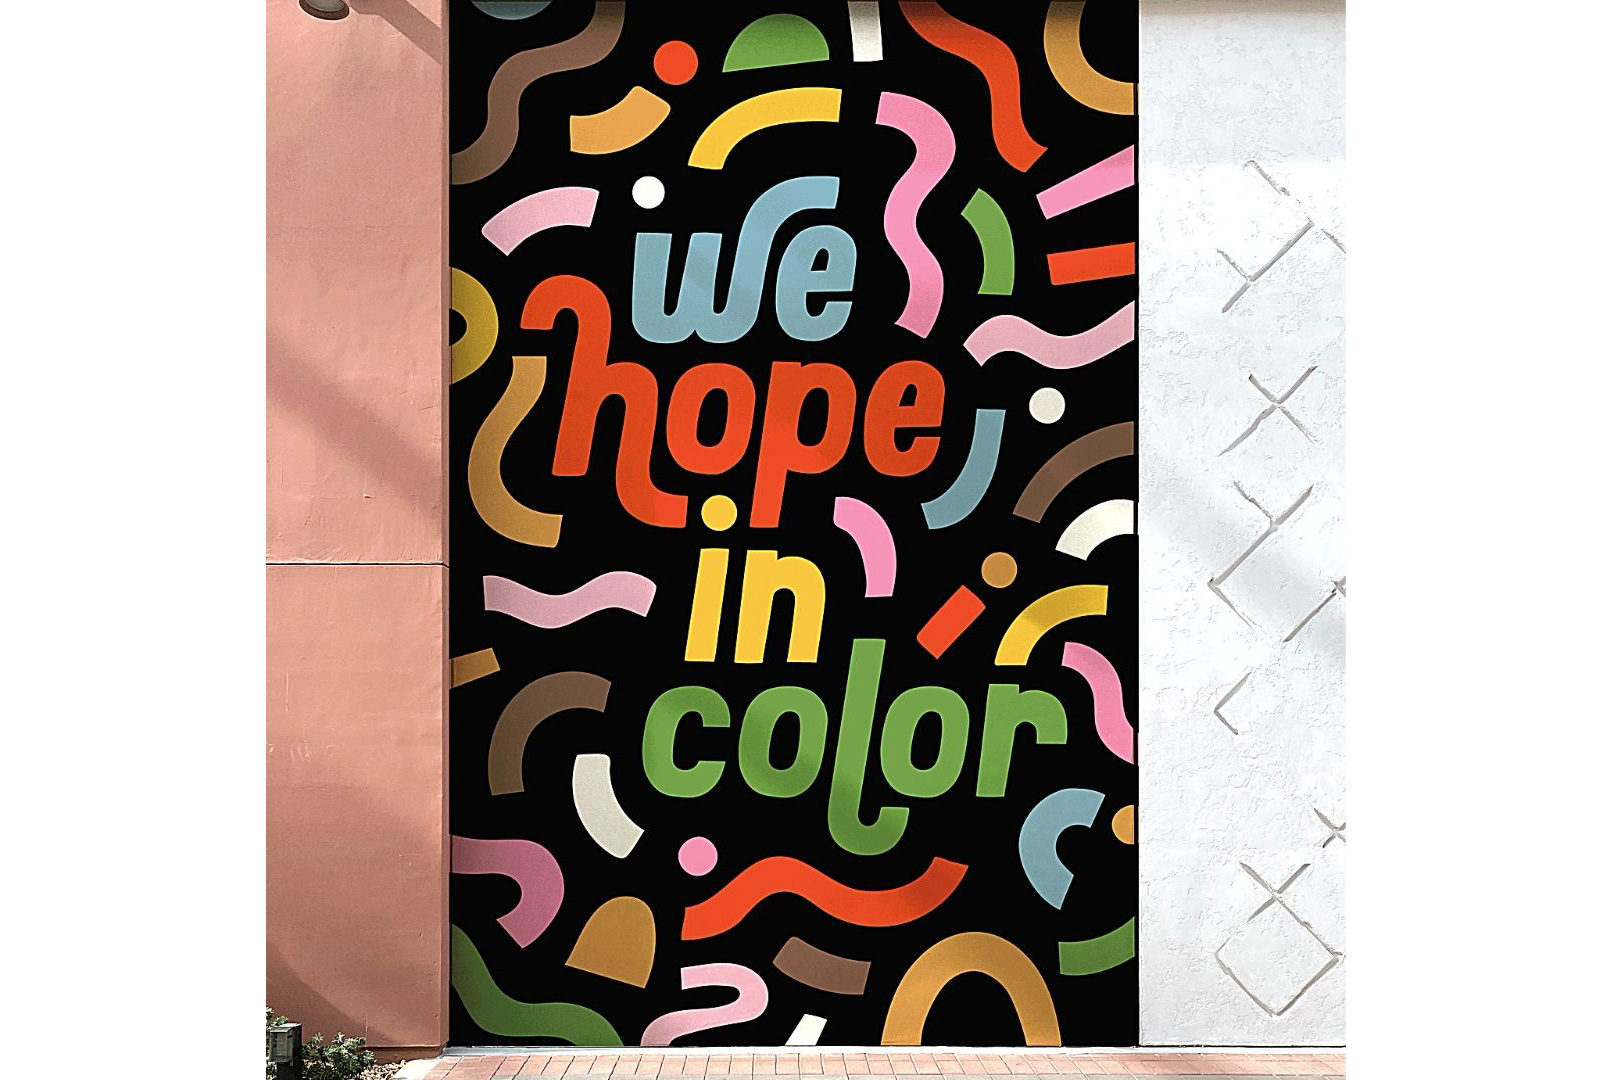 We Hope in Color